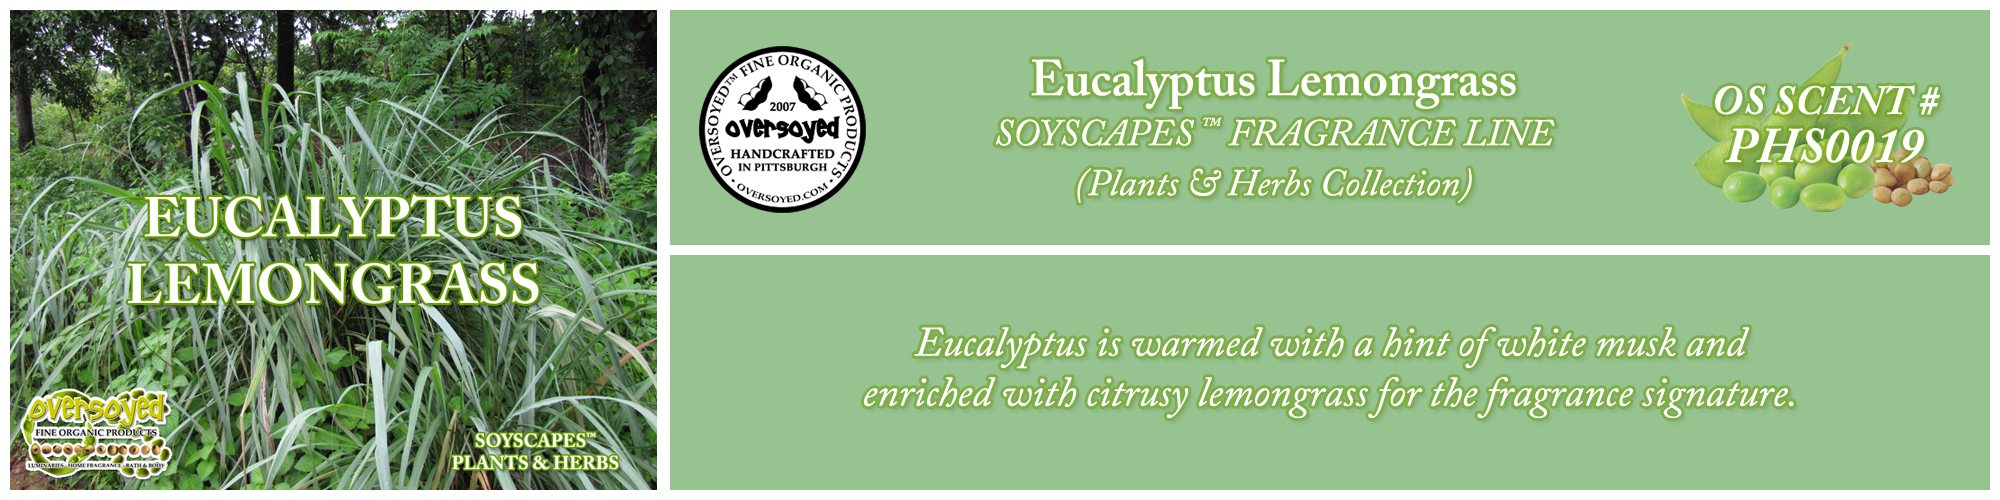 Eucalyptus Lemongrass Handcrafted Products Collection